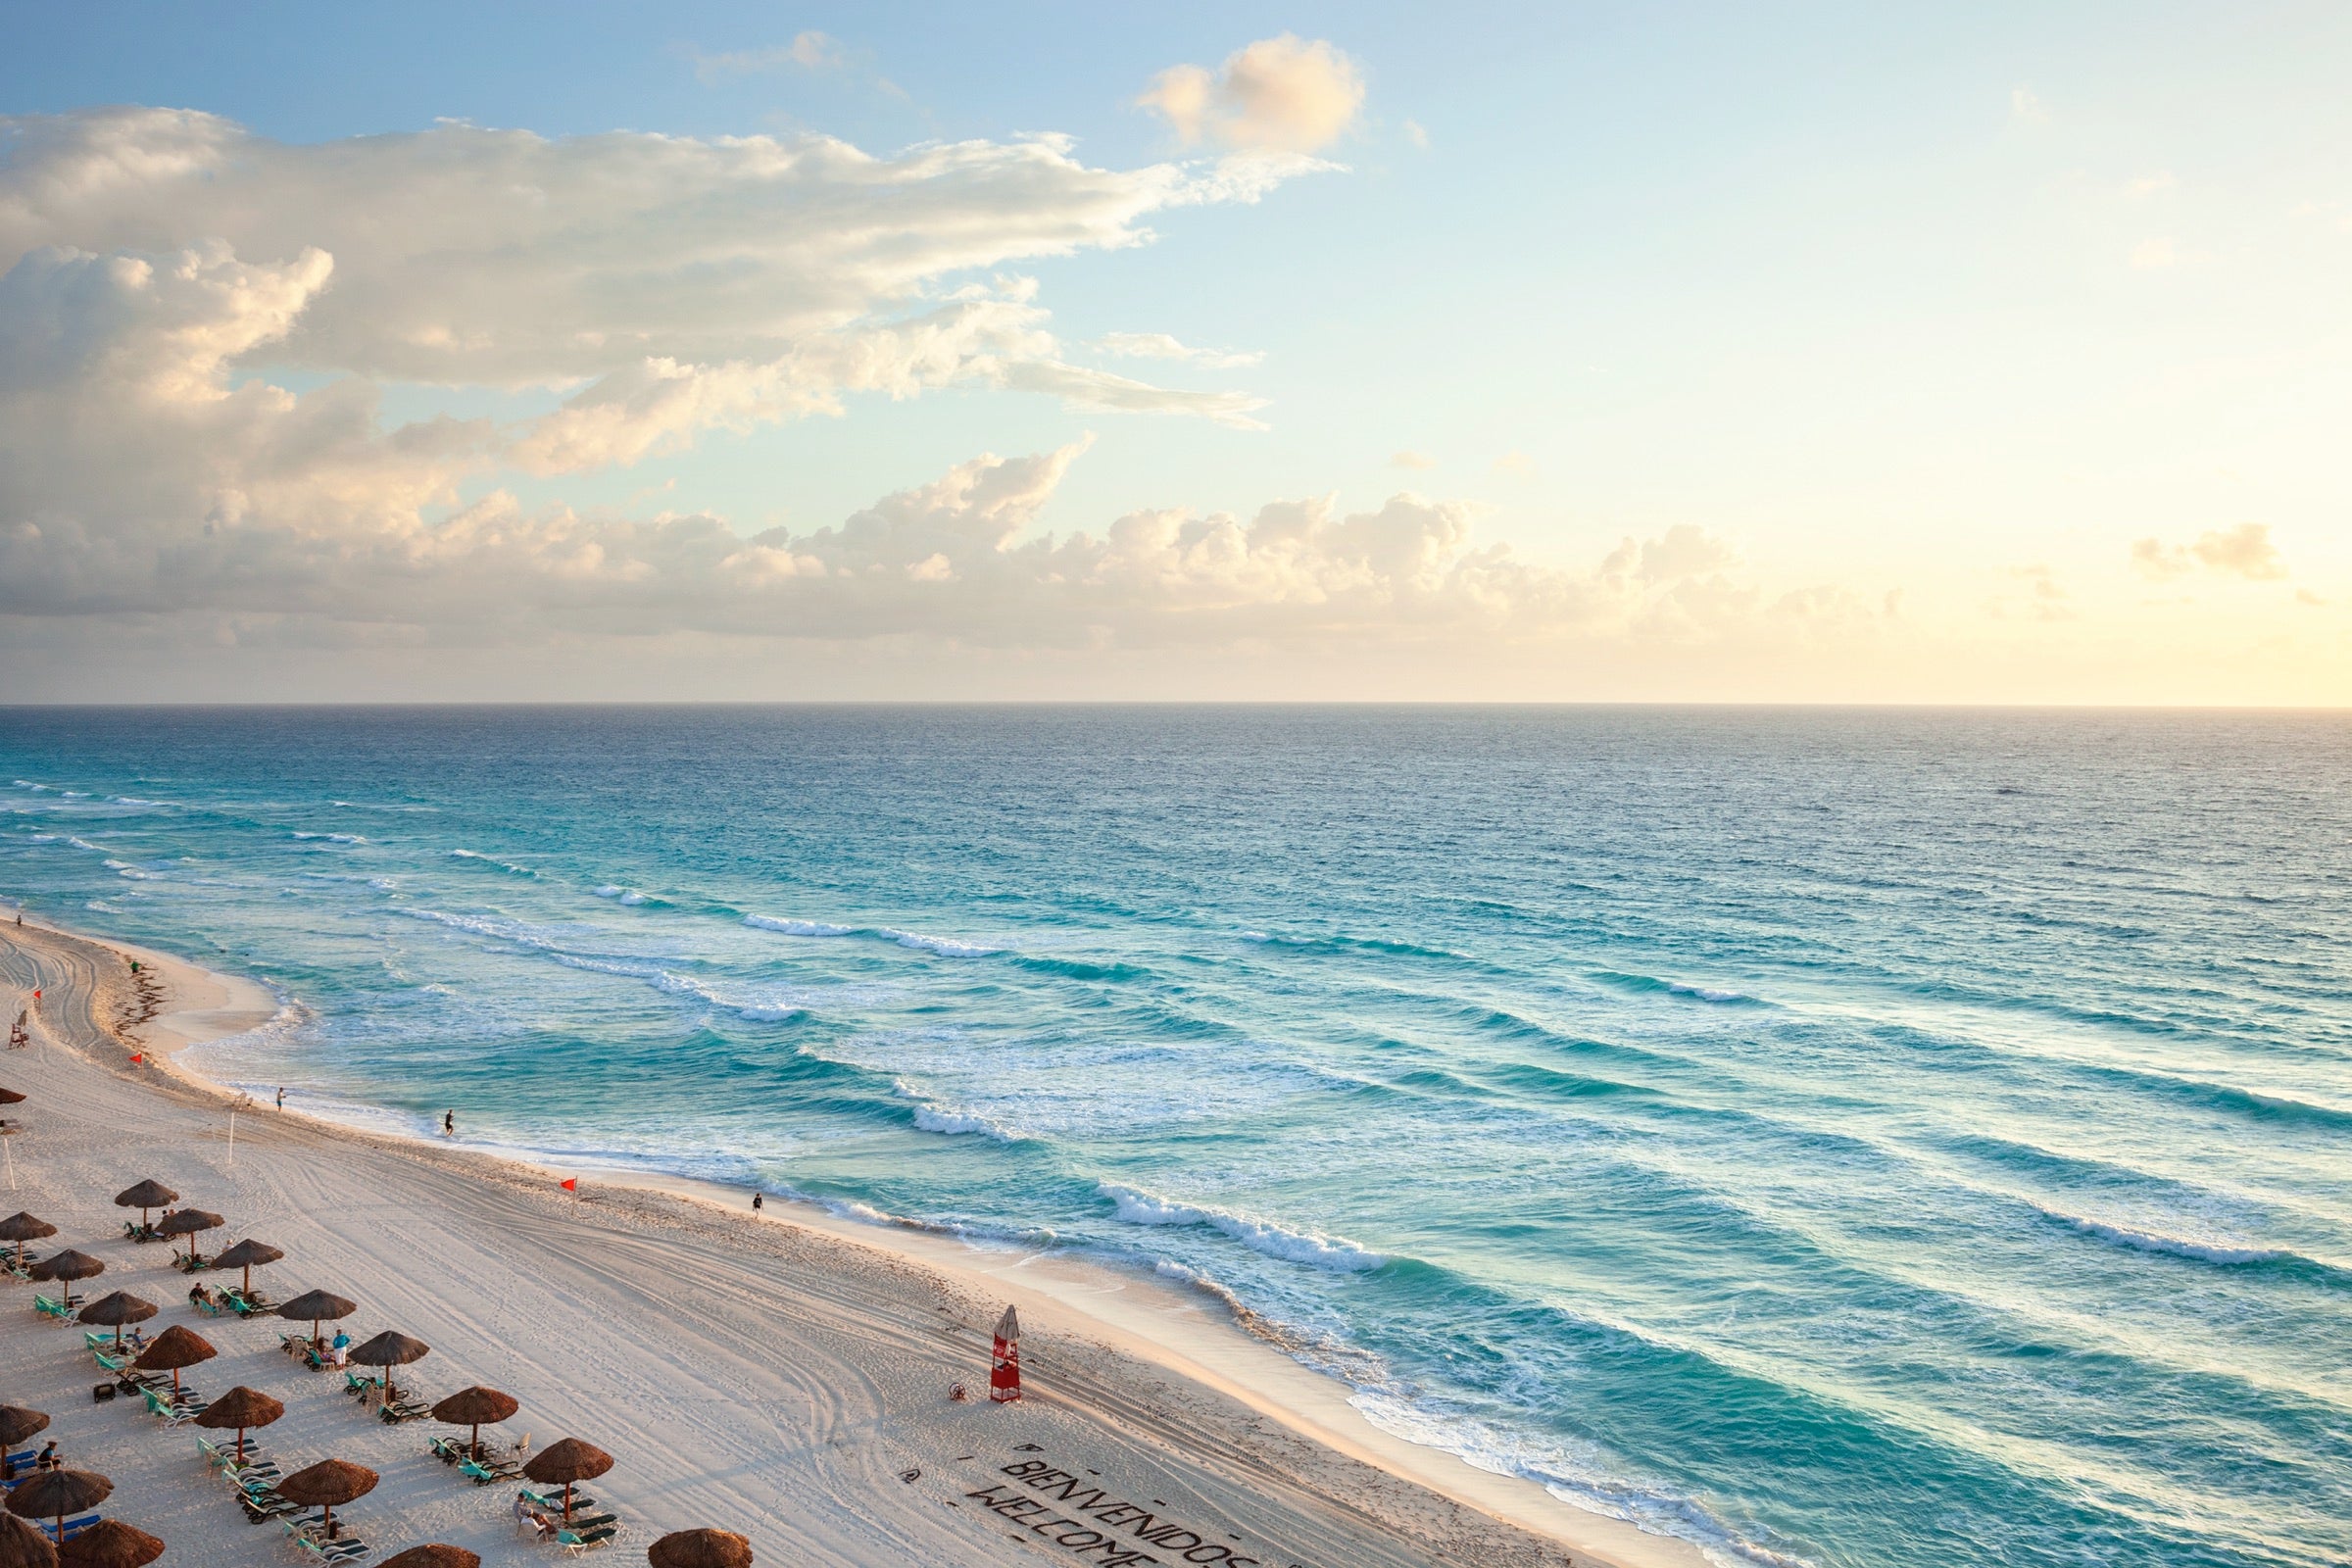 Late summer or autumn vacation? Lots of good deals to Cancun Beach in Cancun